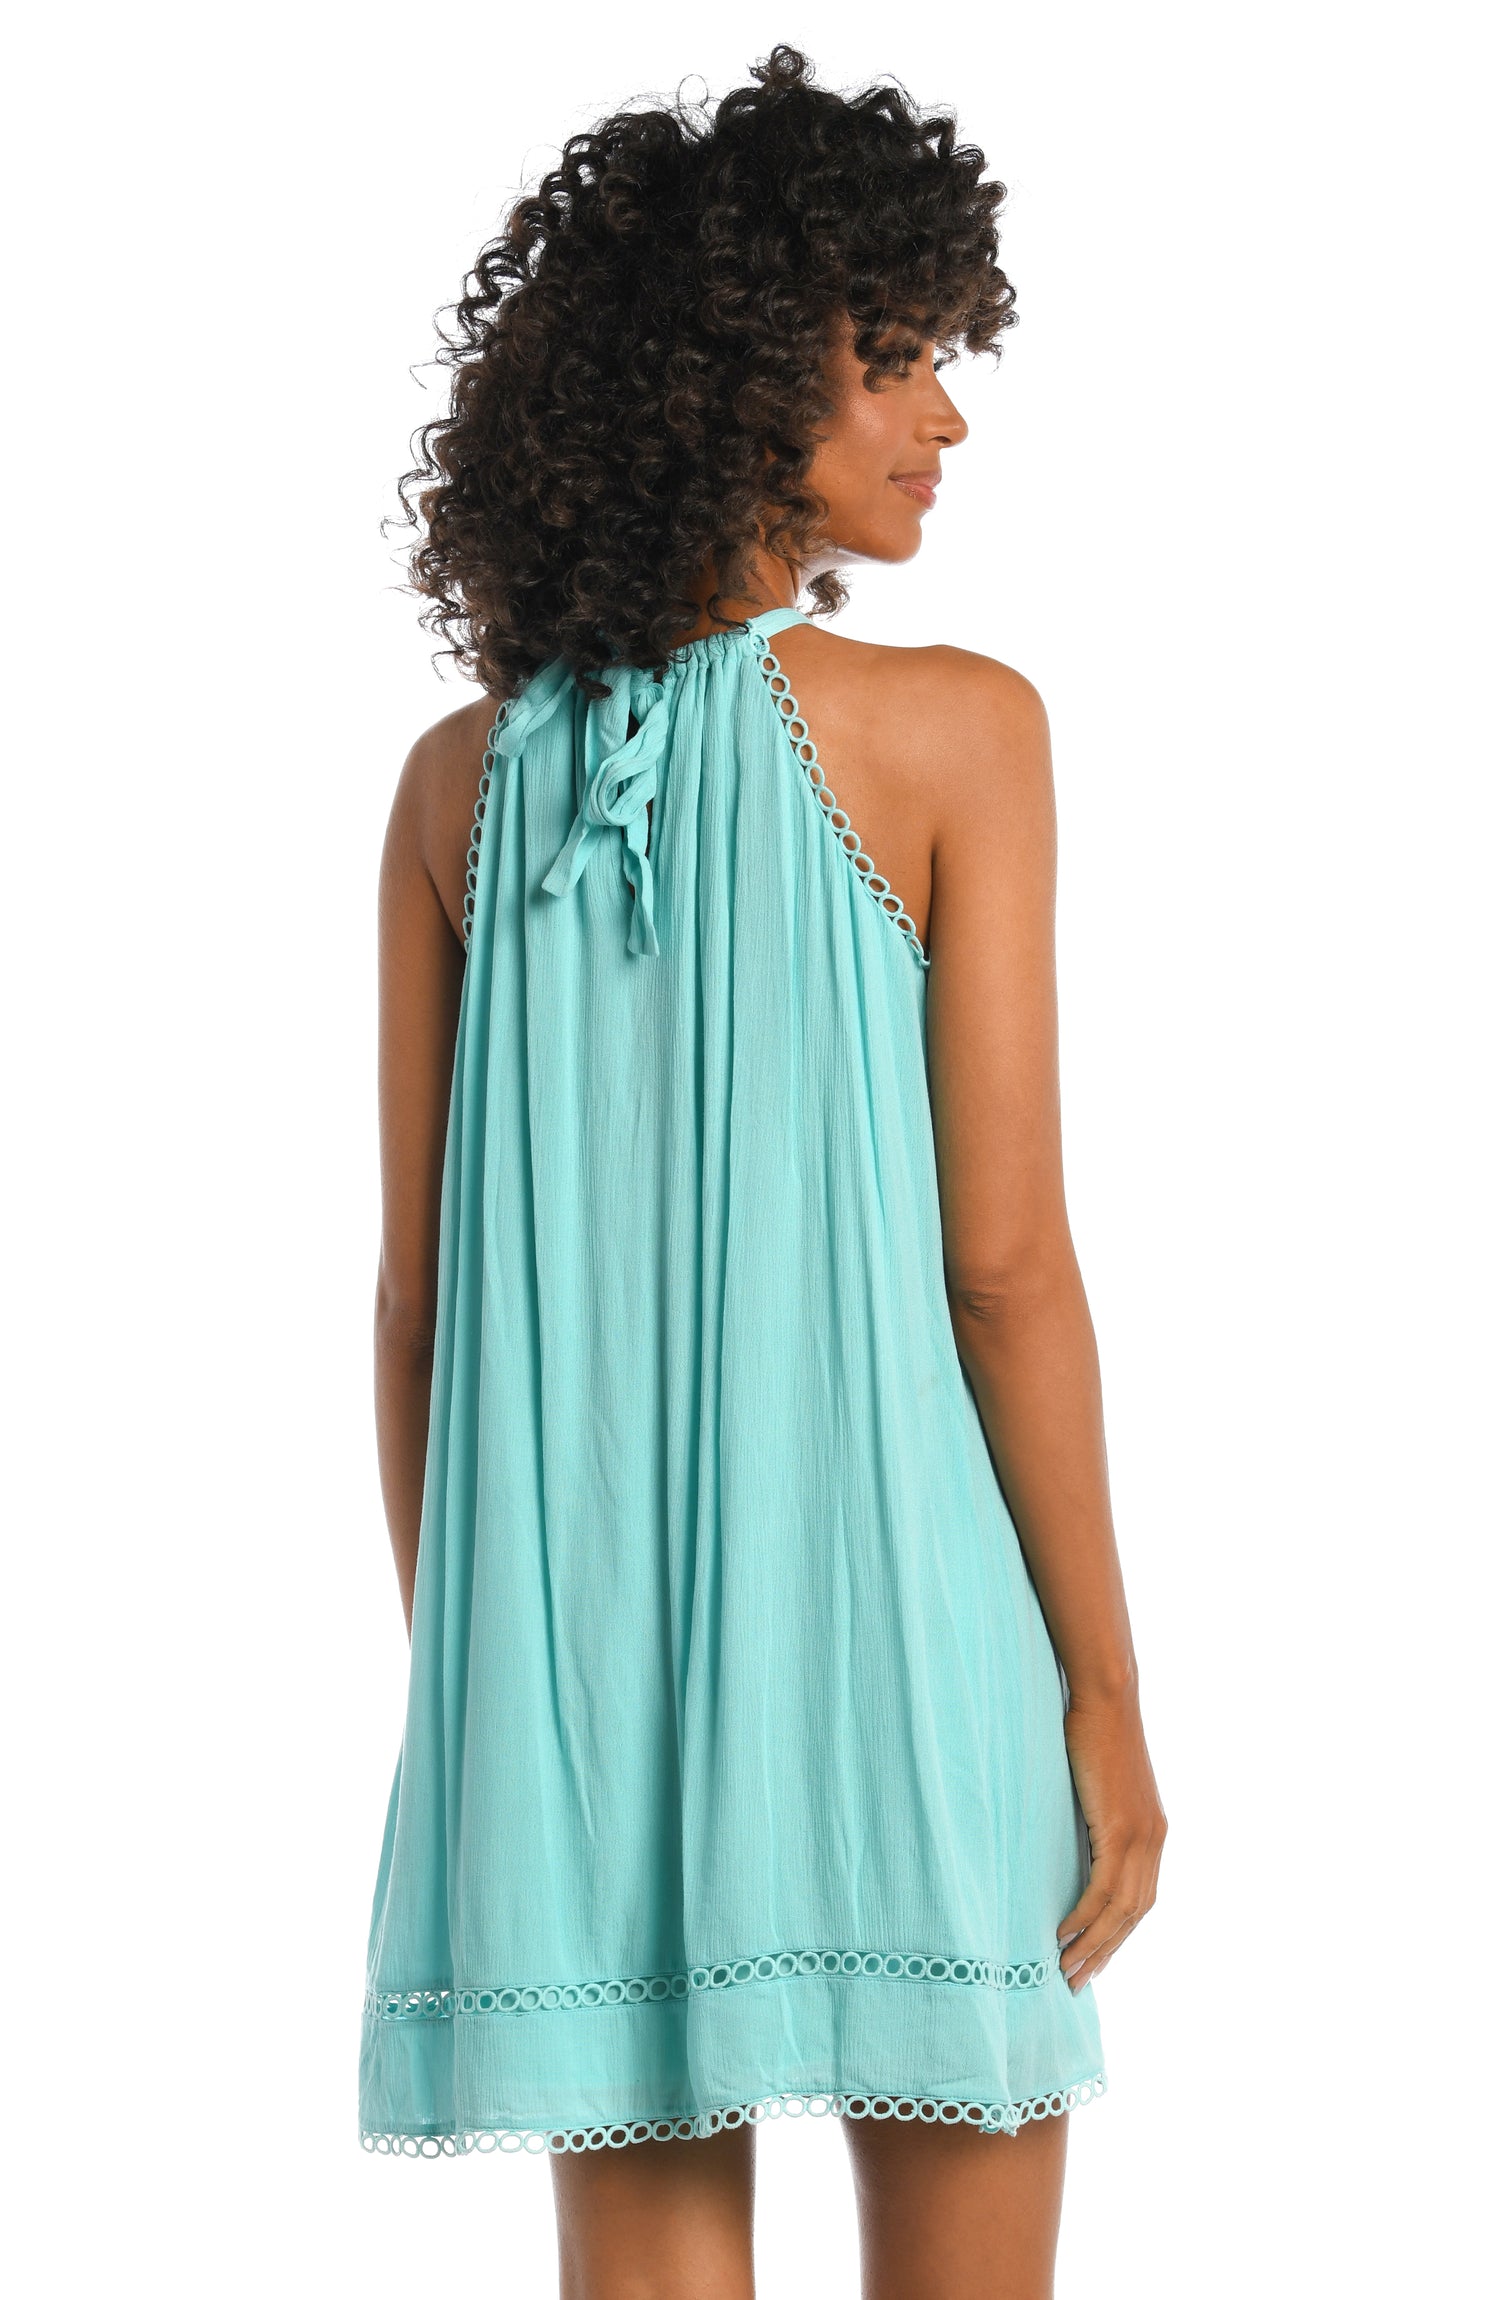 Model is wearing a ice blue colored dress cover up from our Illusion Covers collection!